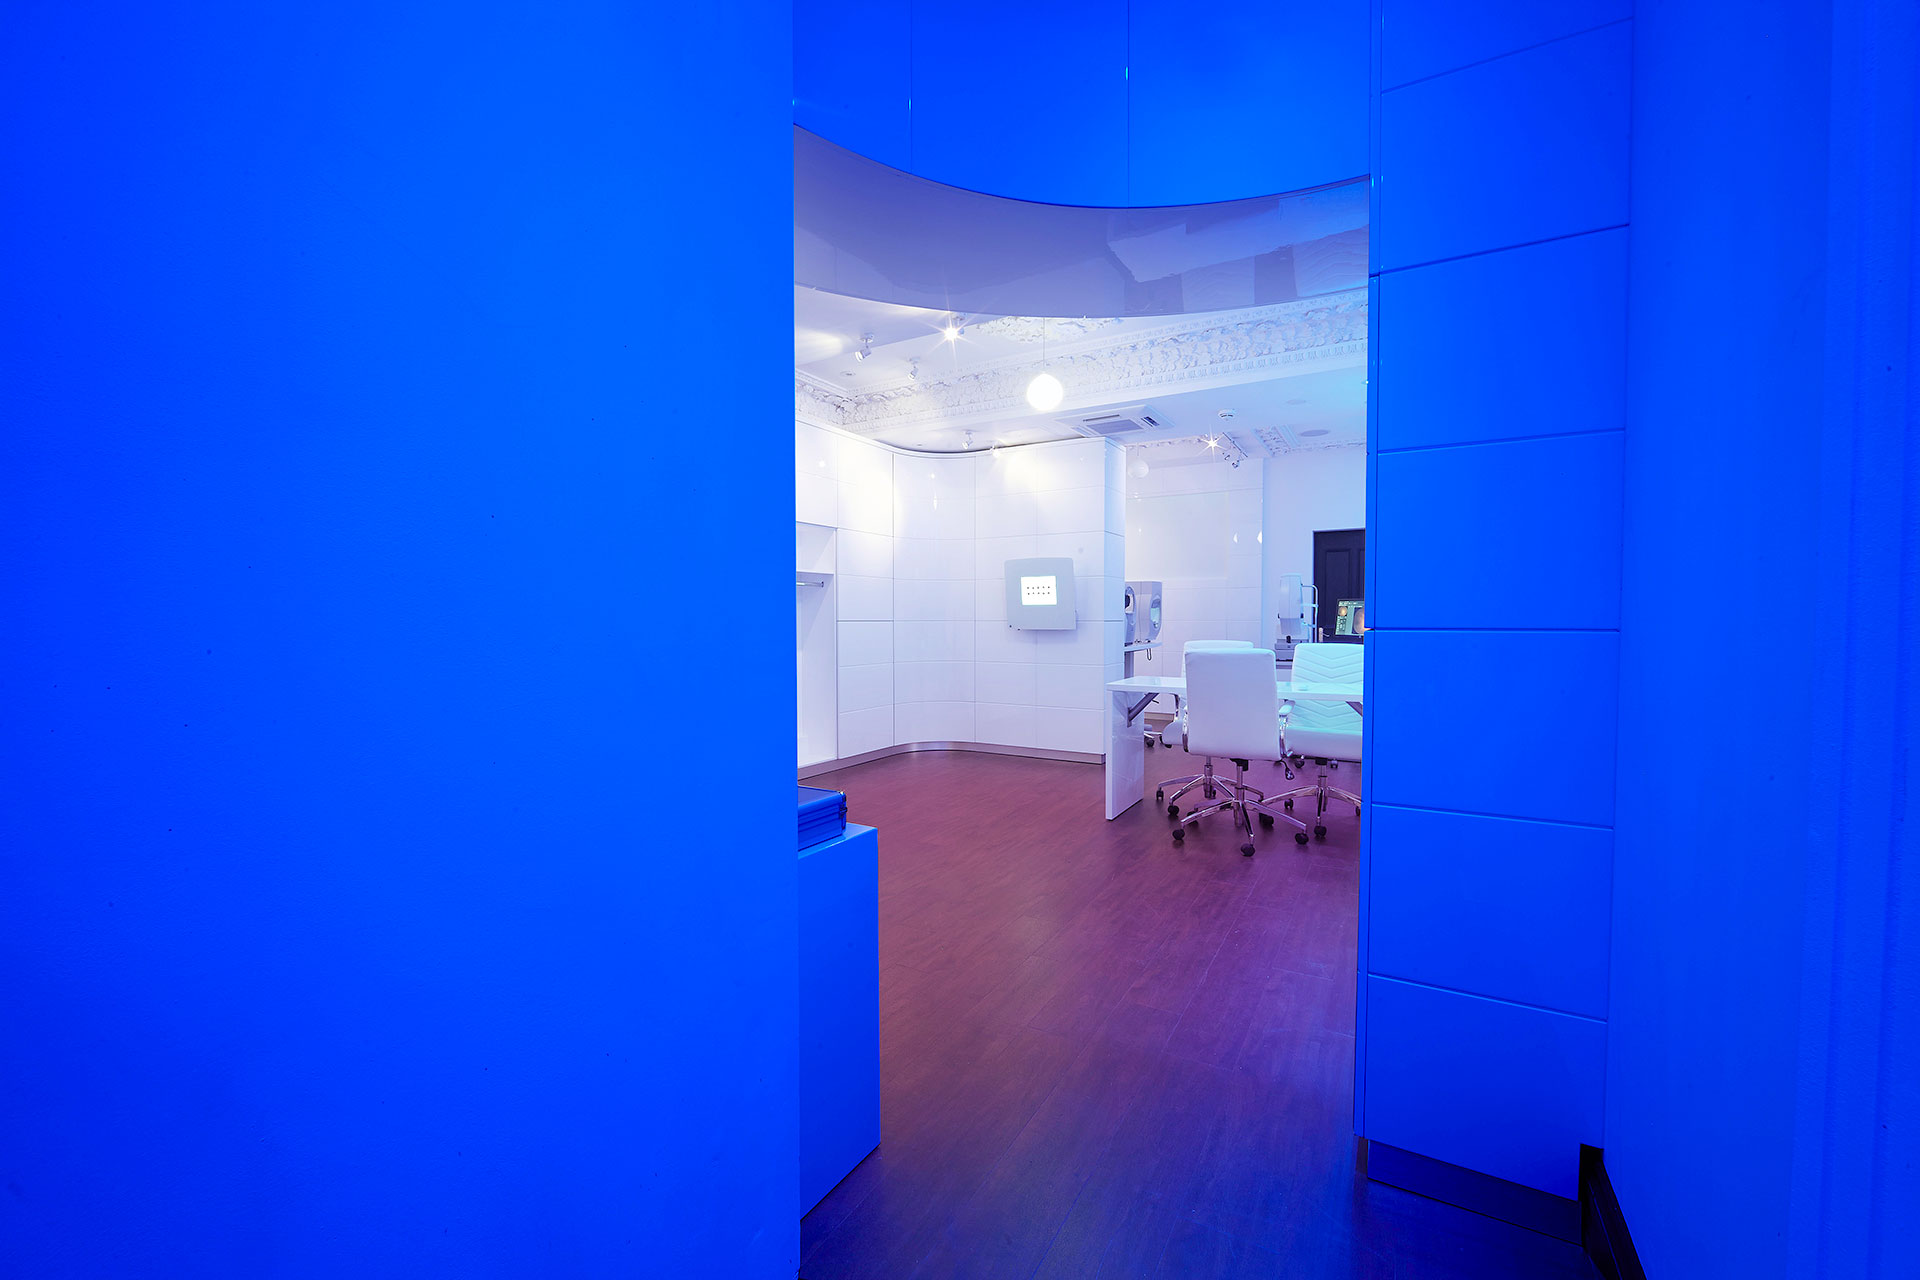 Tom Davies Vision Clinic in blue light